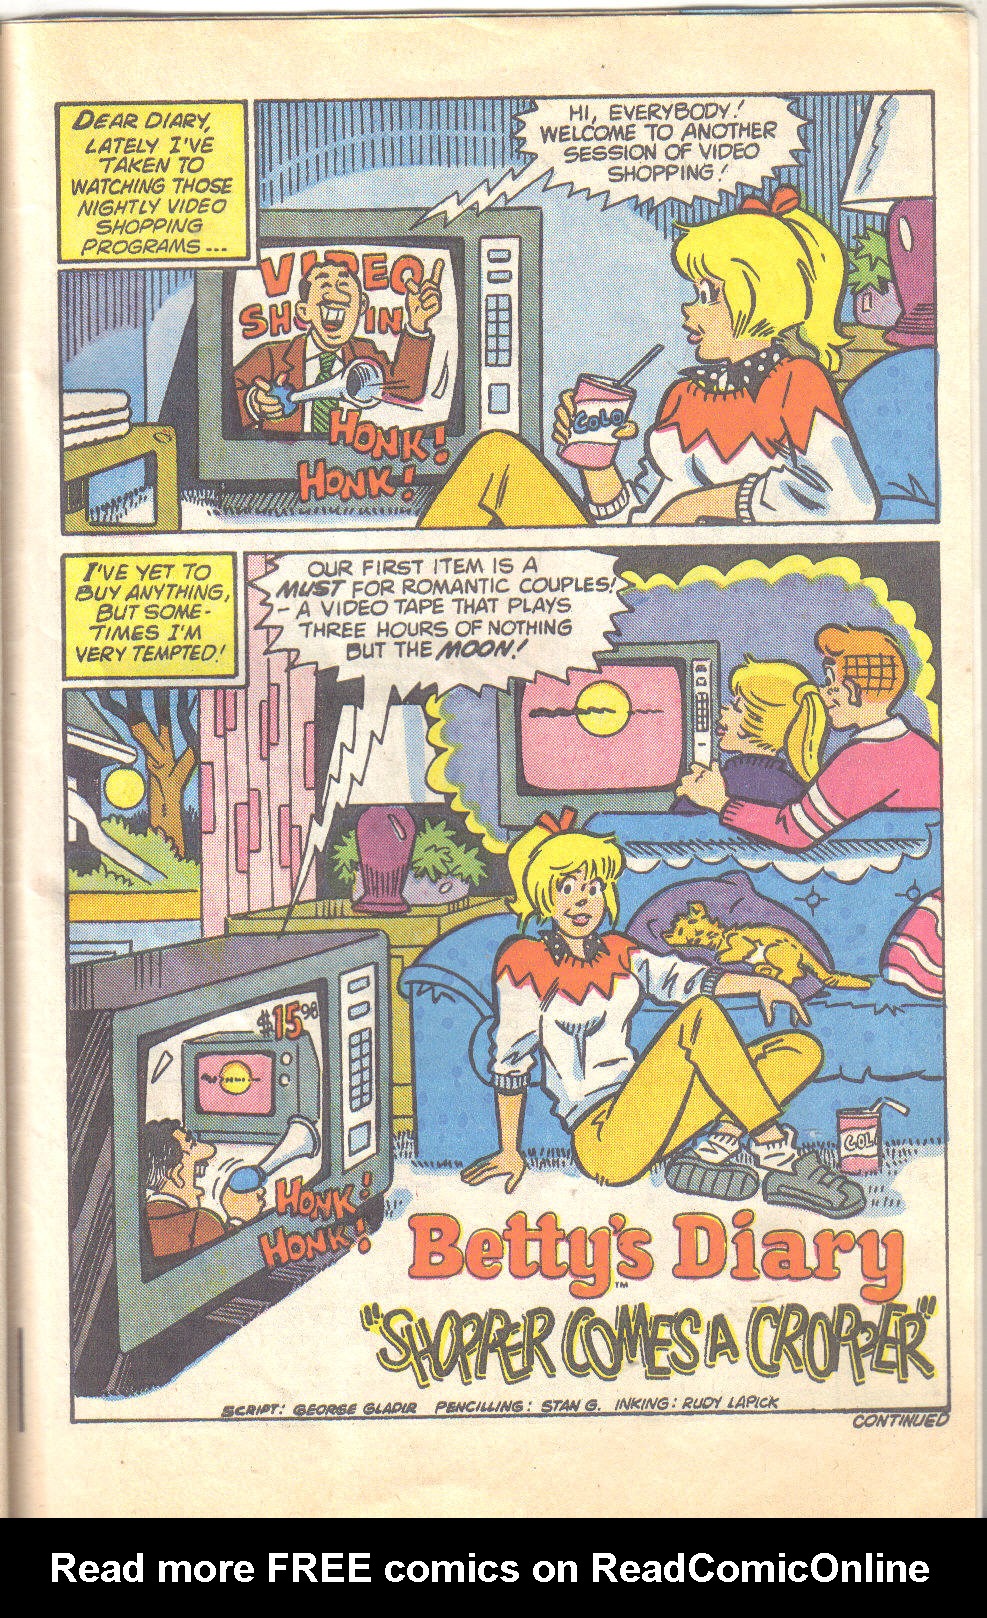 Read online Betty's Diary comic -  Issue #16 - 27